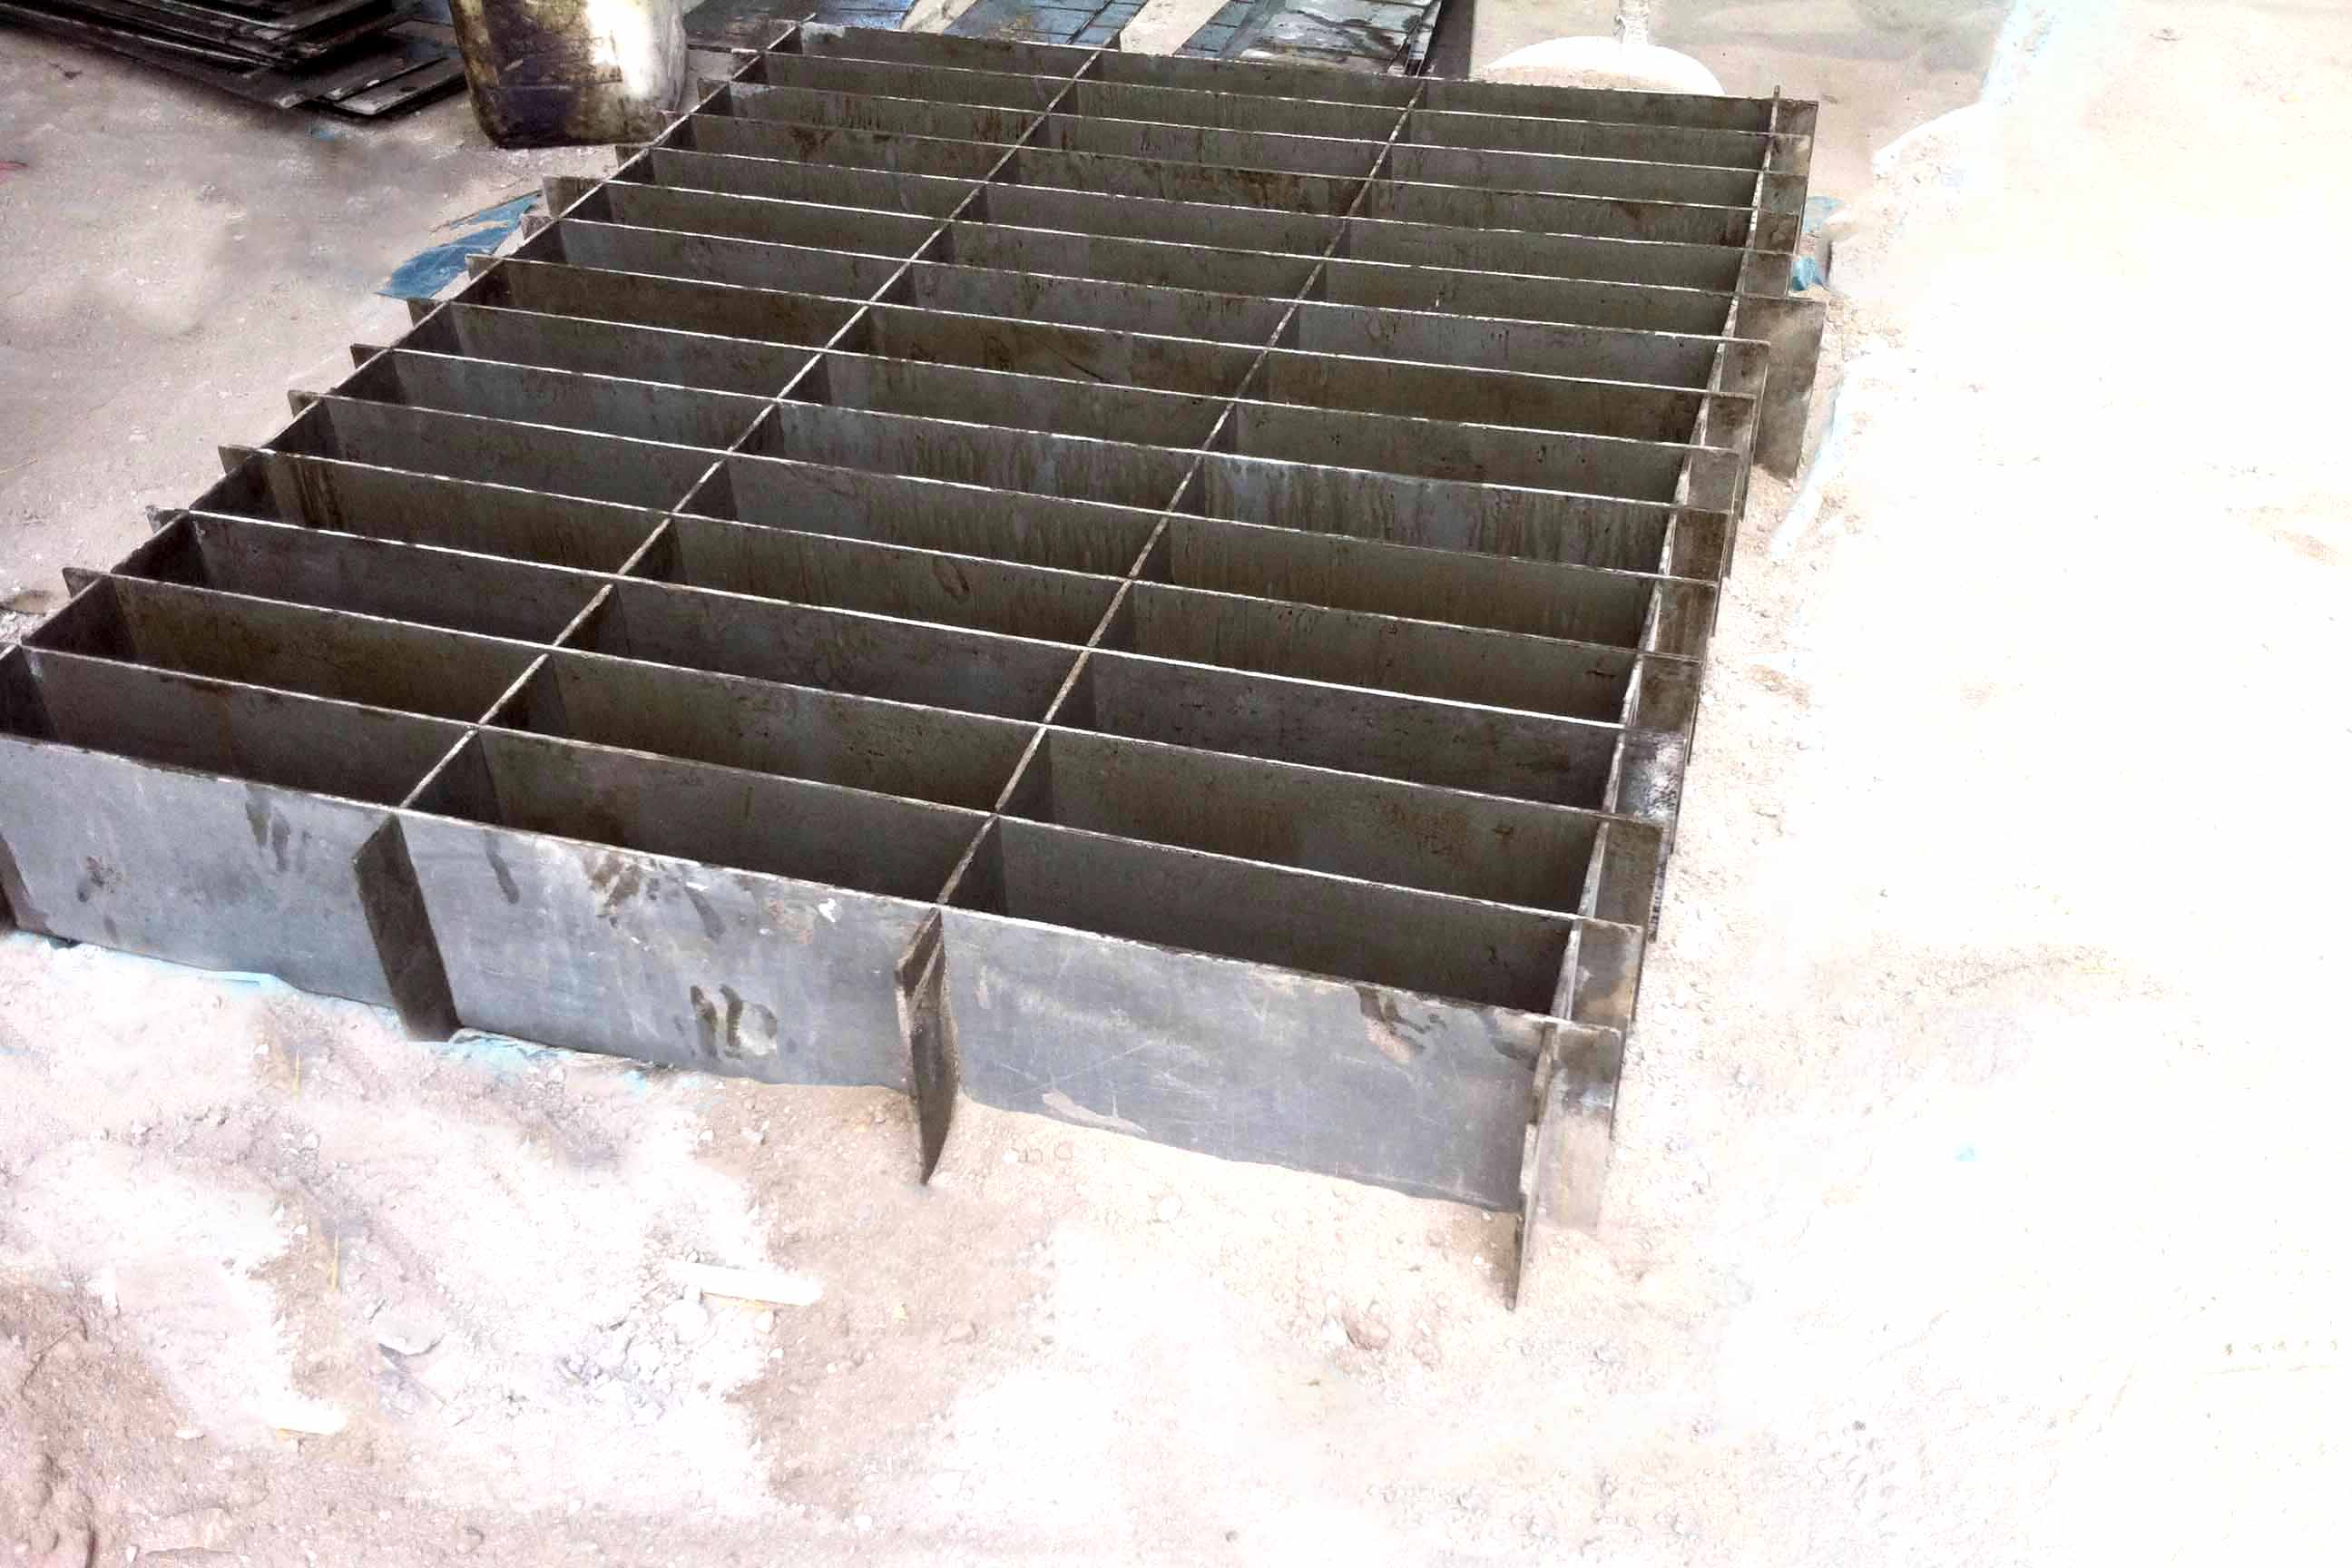 ClC block mould is partitioned into cells